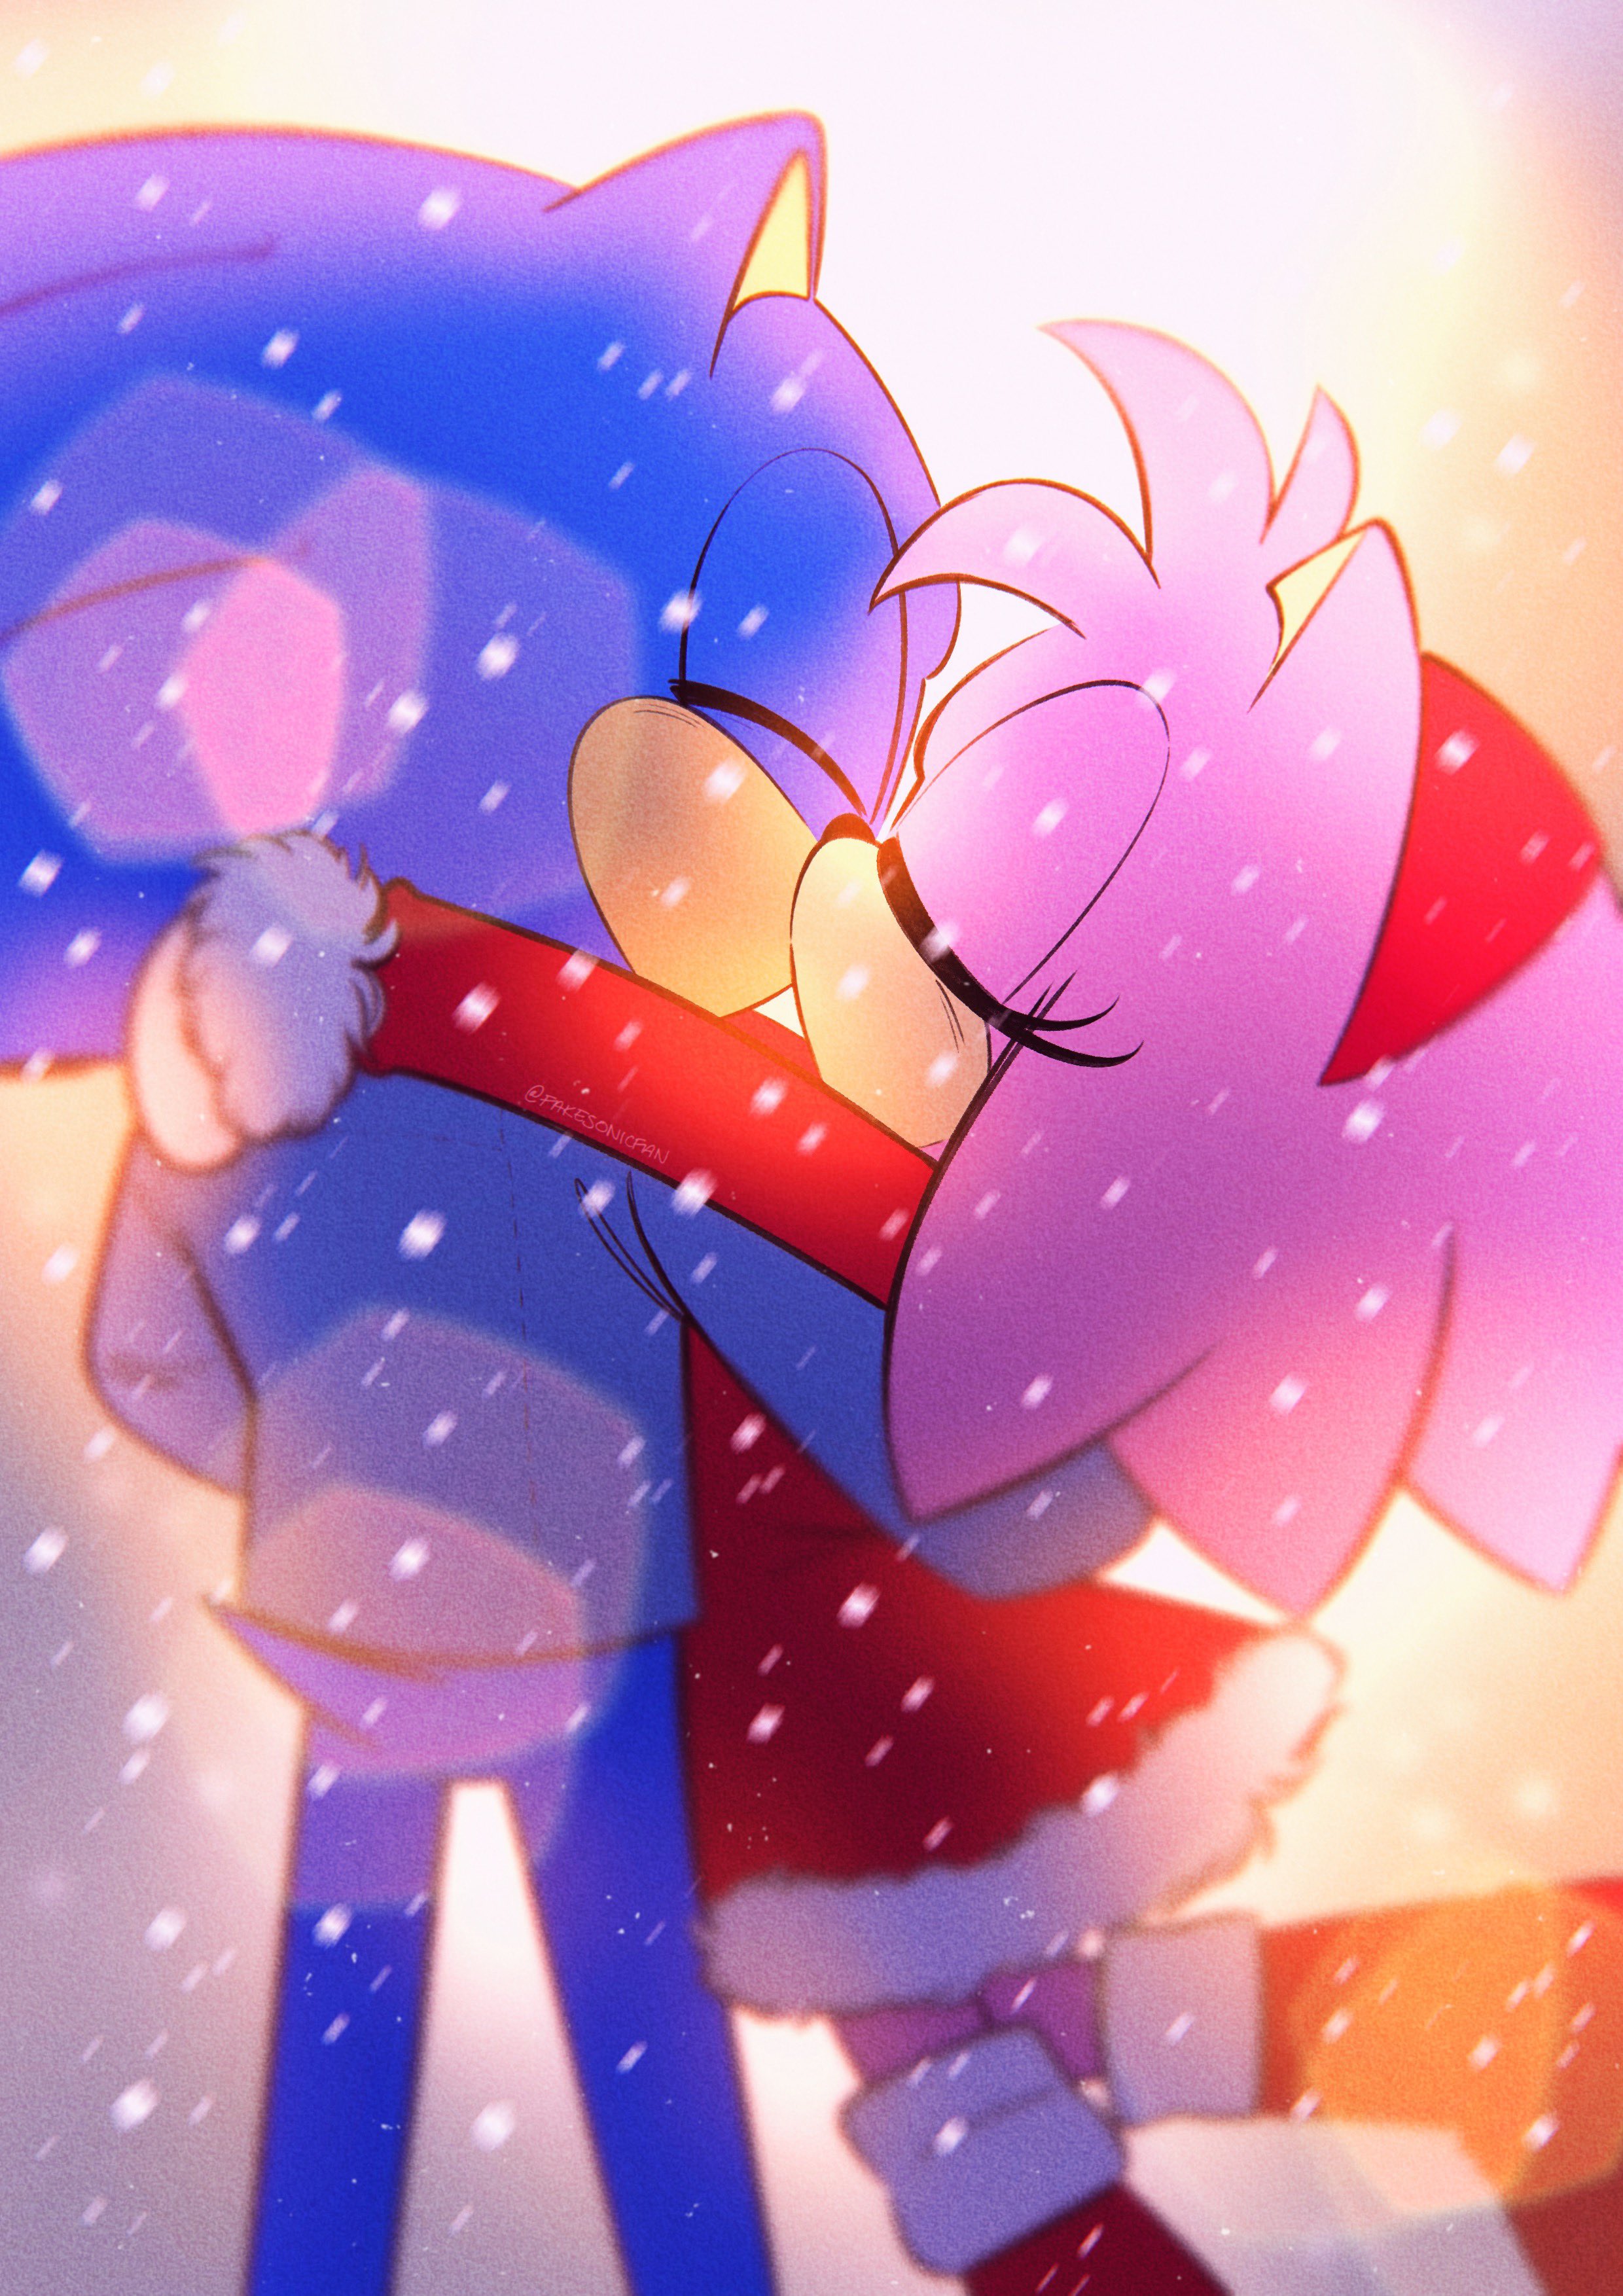 NOT MY ART!!!! amazing adorable Sonamy art by @Steffy_bs on